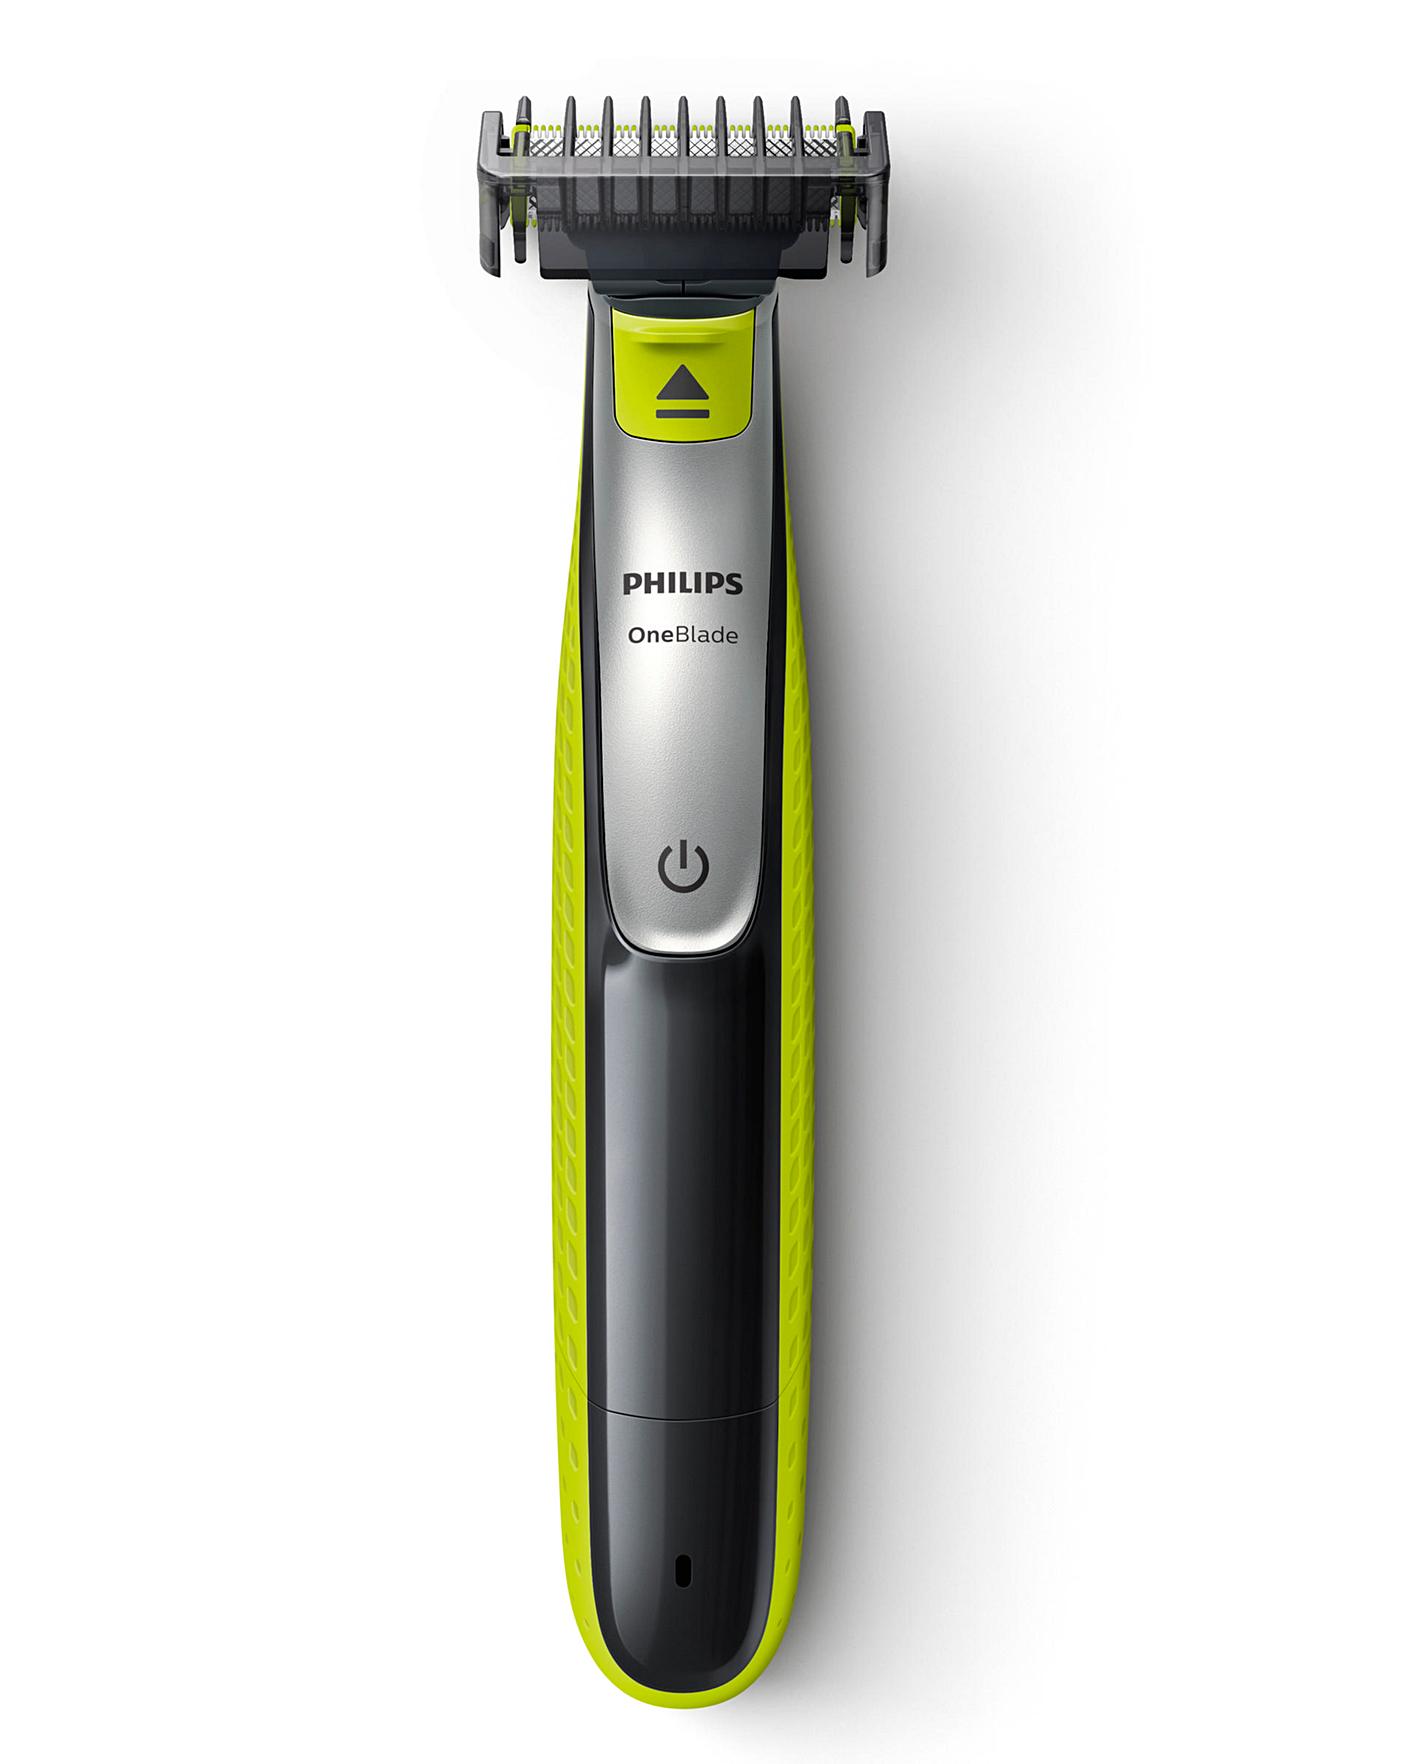 philips blade trimmer